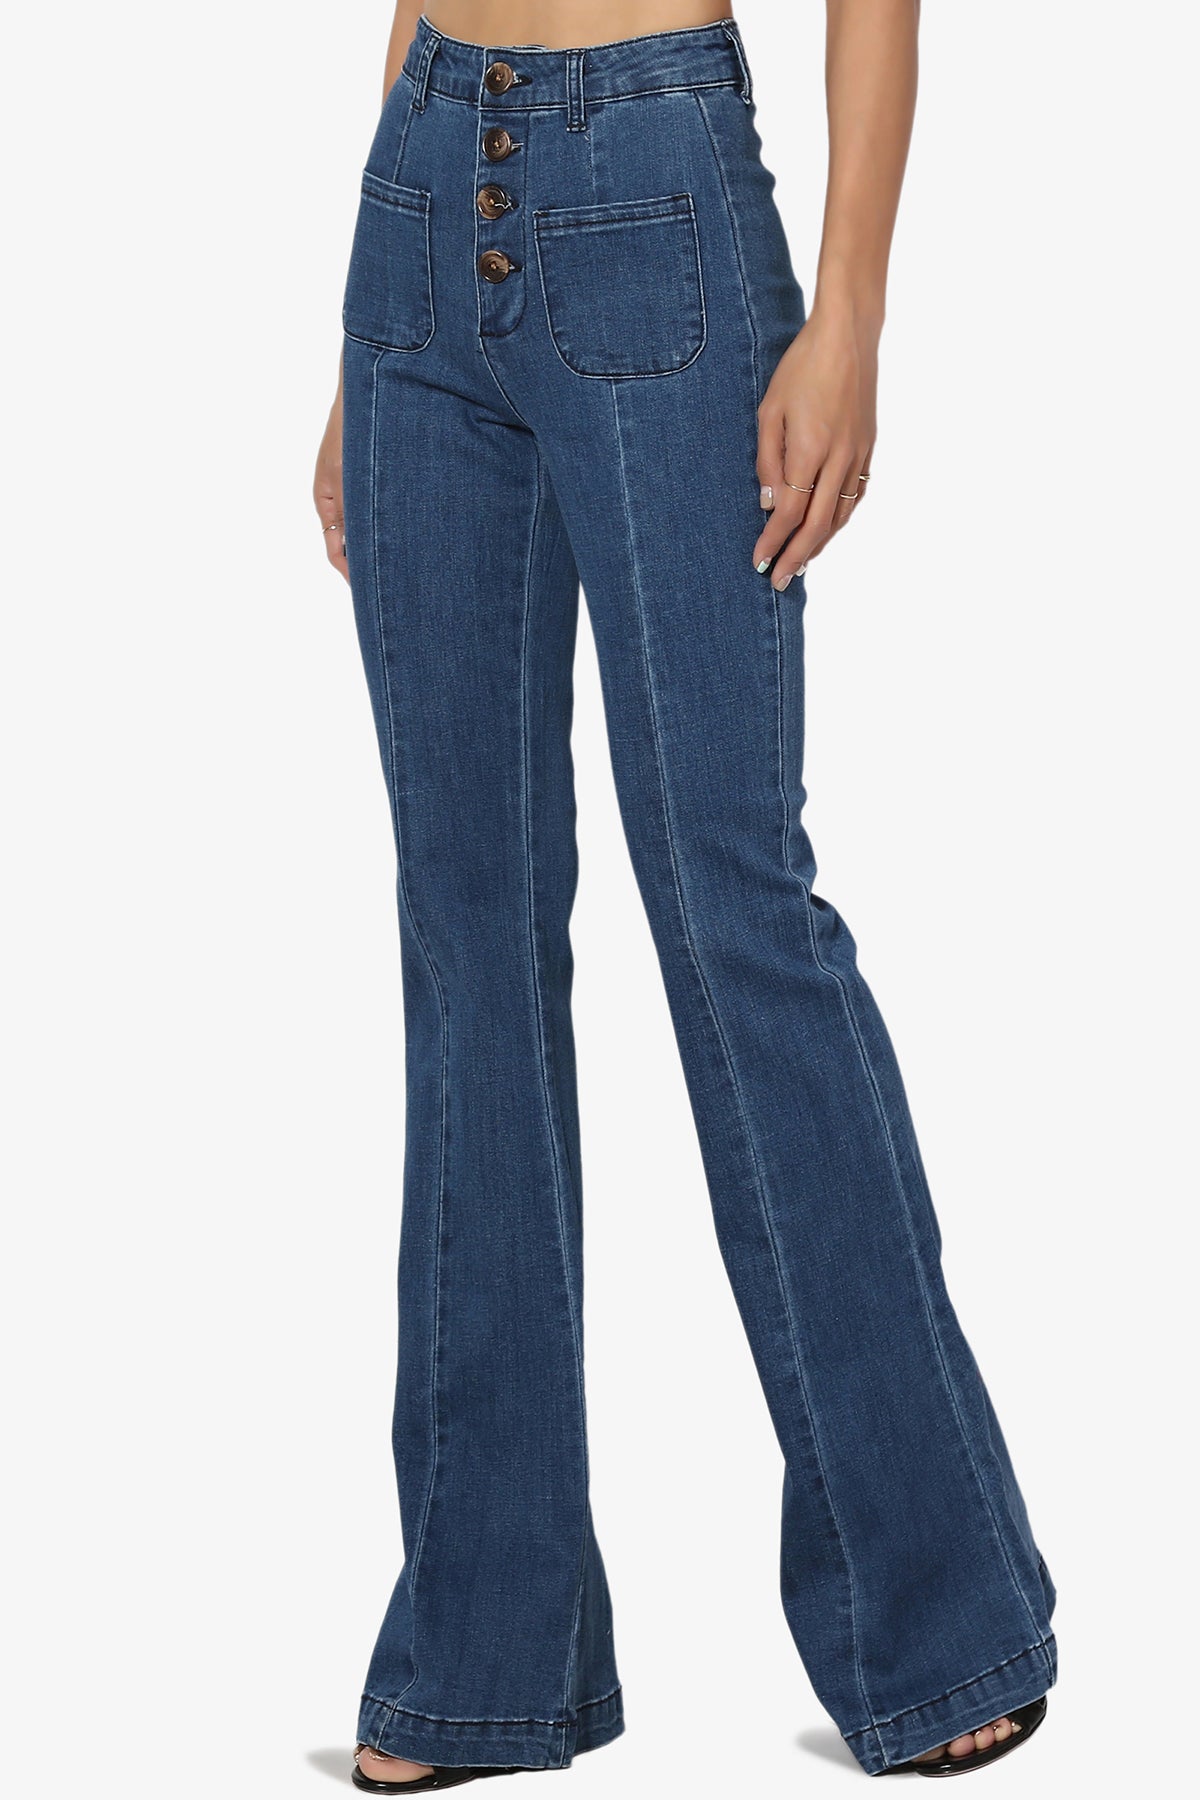 Buy MK Jeans Wide Leg Dark Blue Jeans for Women Baggy Jeans | Size-26  (STONEBLUE_ZX_3) at Amazon.in